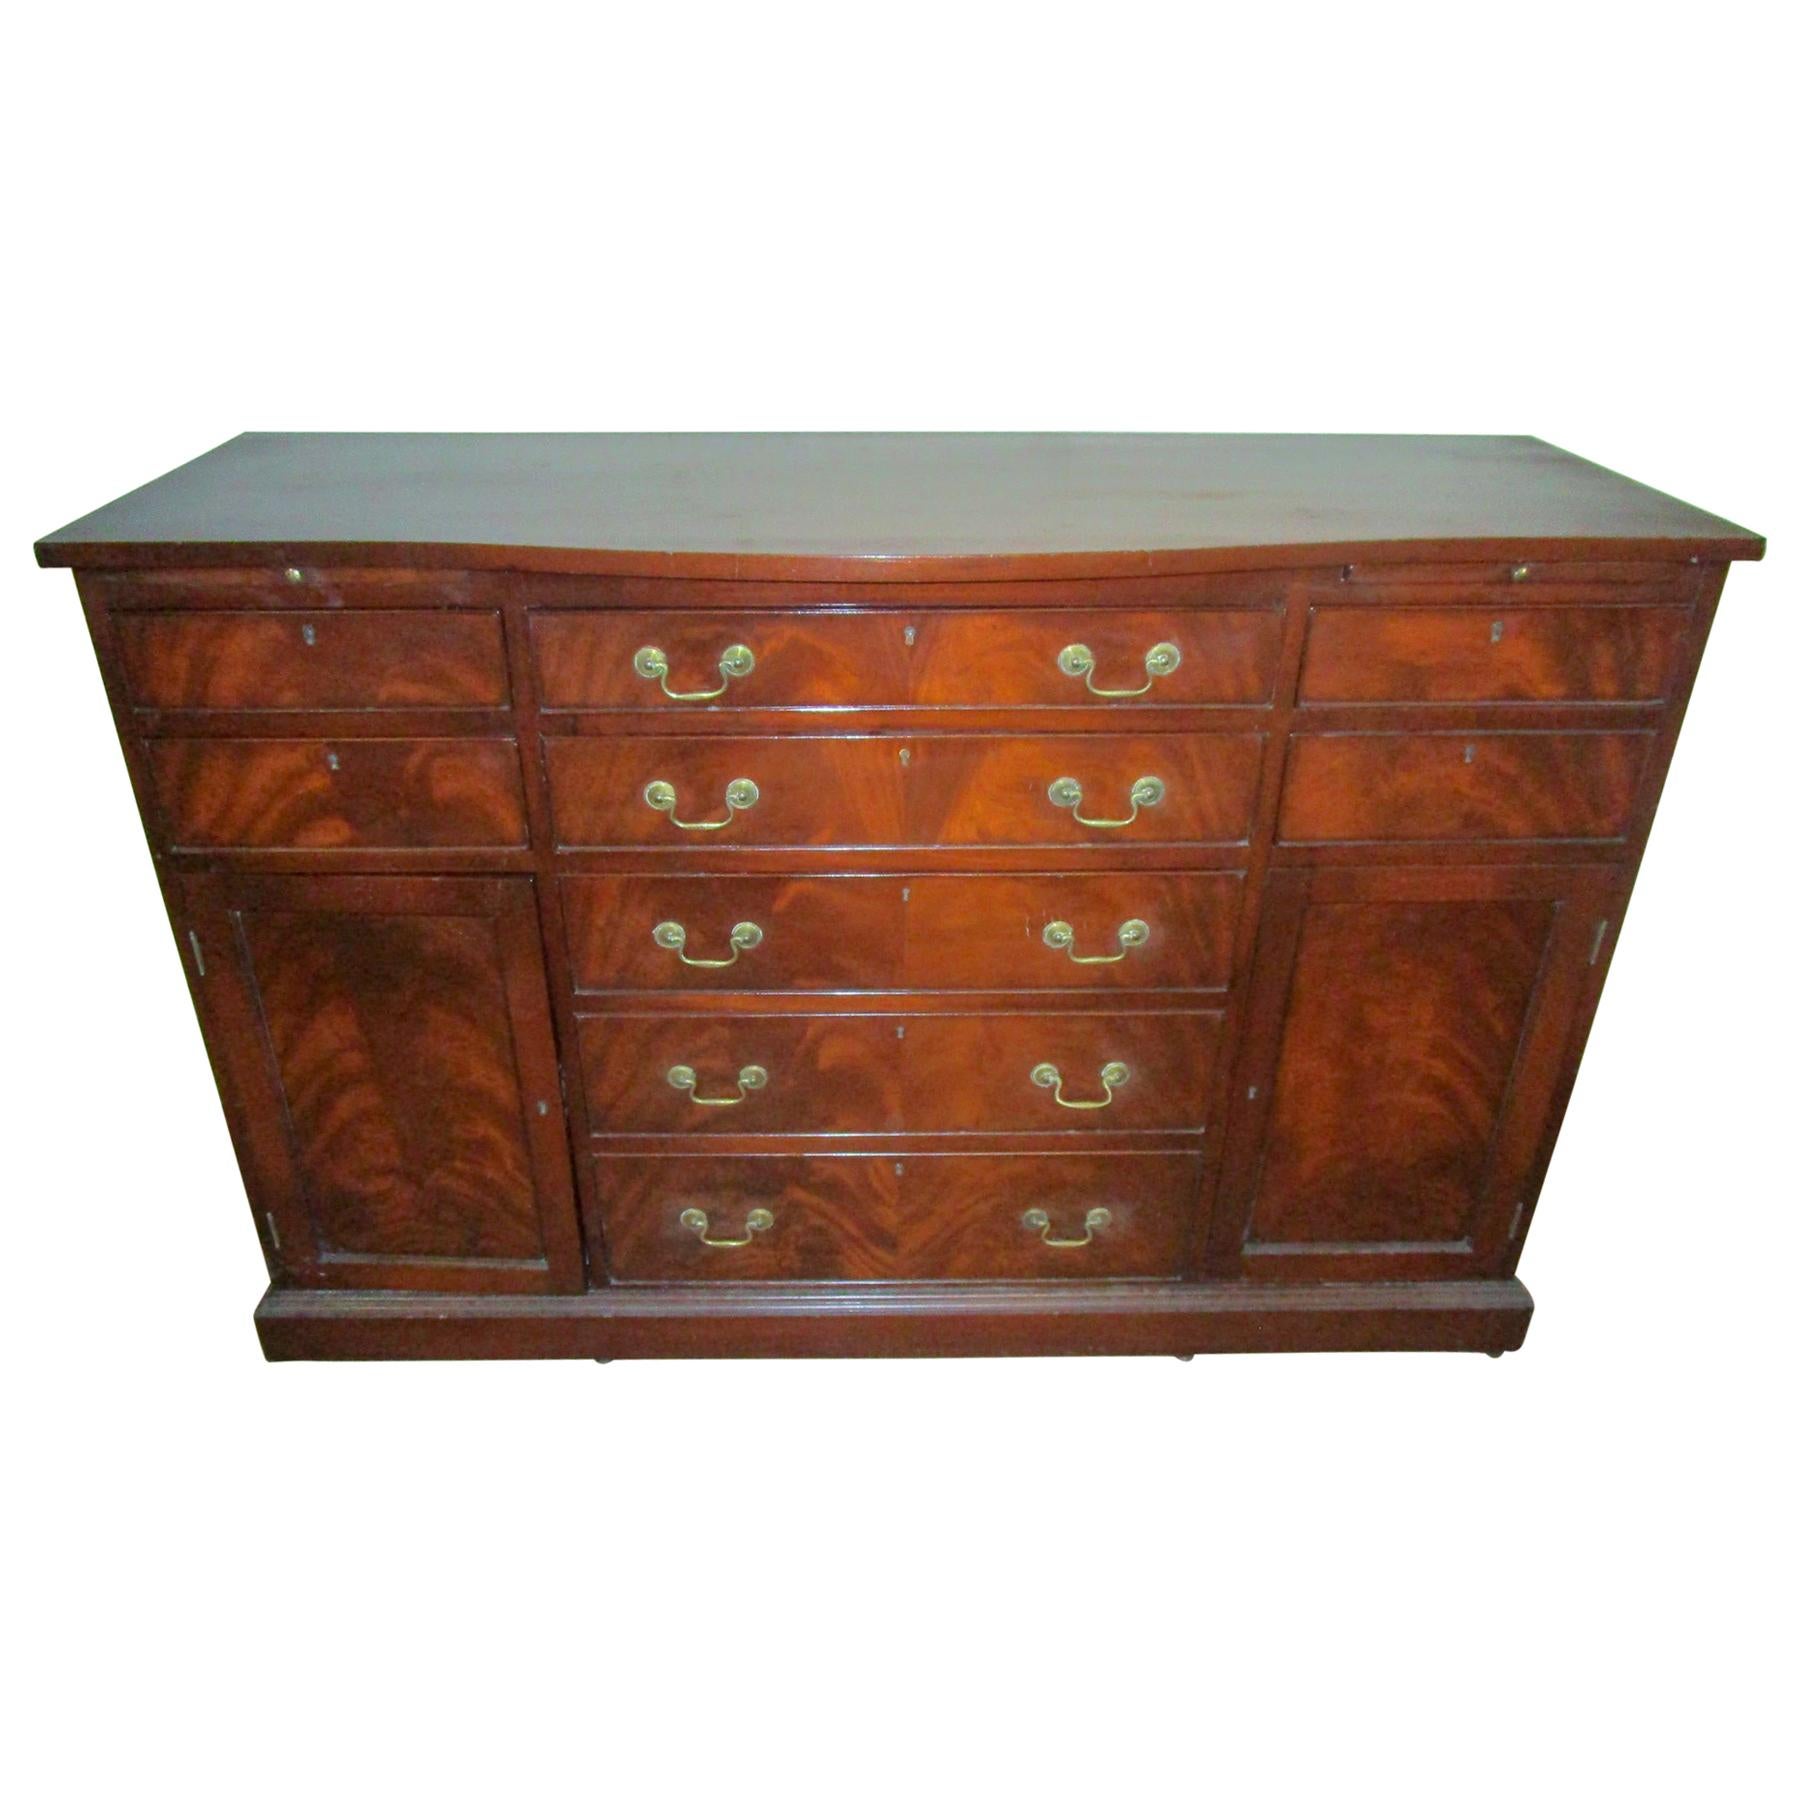 20th c American Mahogany Dining Room Server with Custom Silverware Drawers For Sale